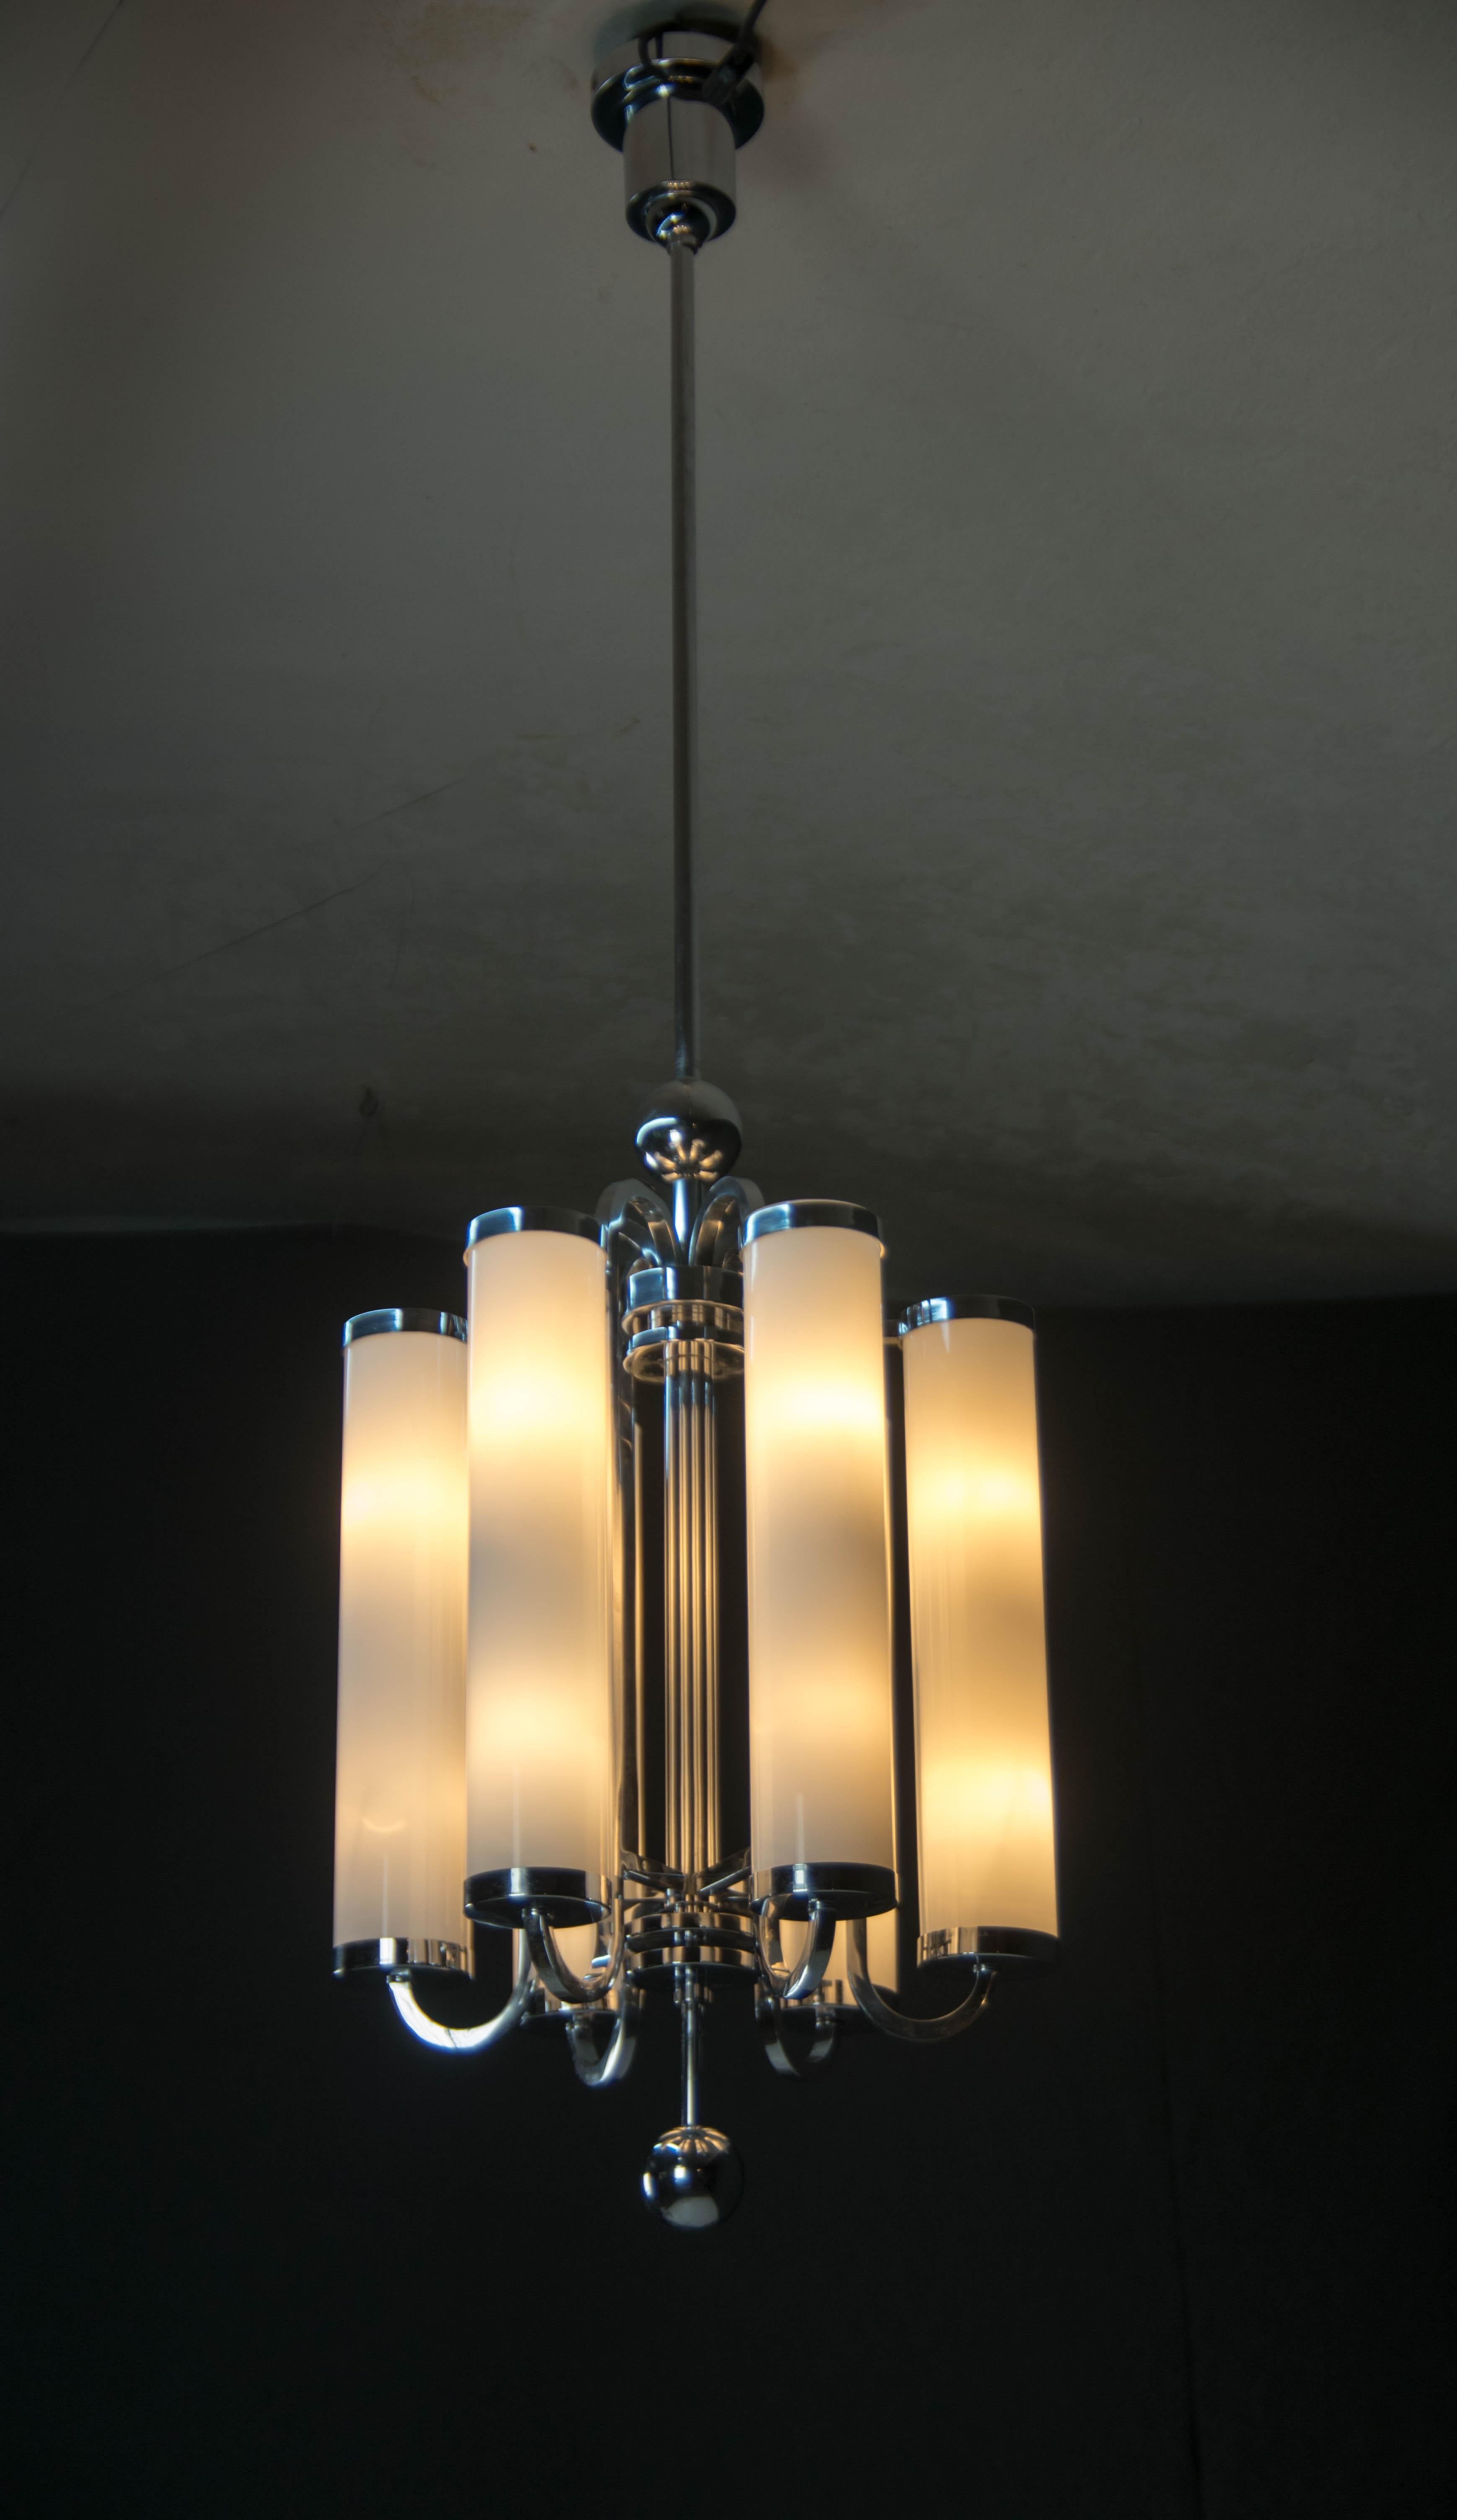 Czech Large Bauhaus Chandelier with 6 Tubular Shades, 1930s